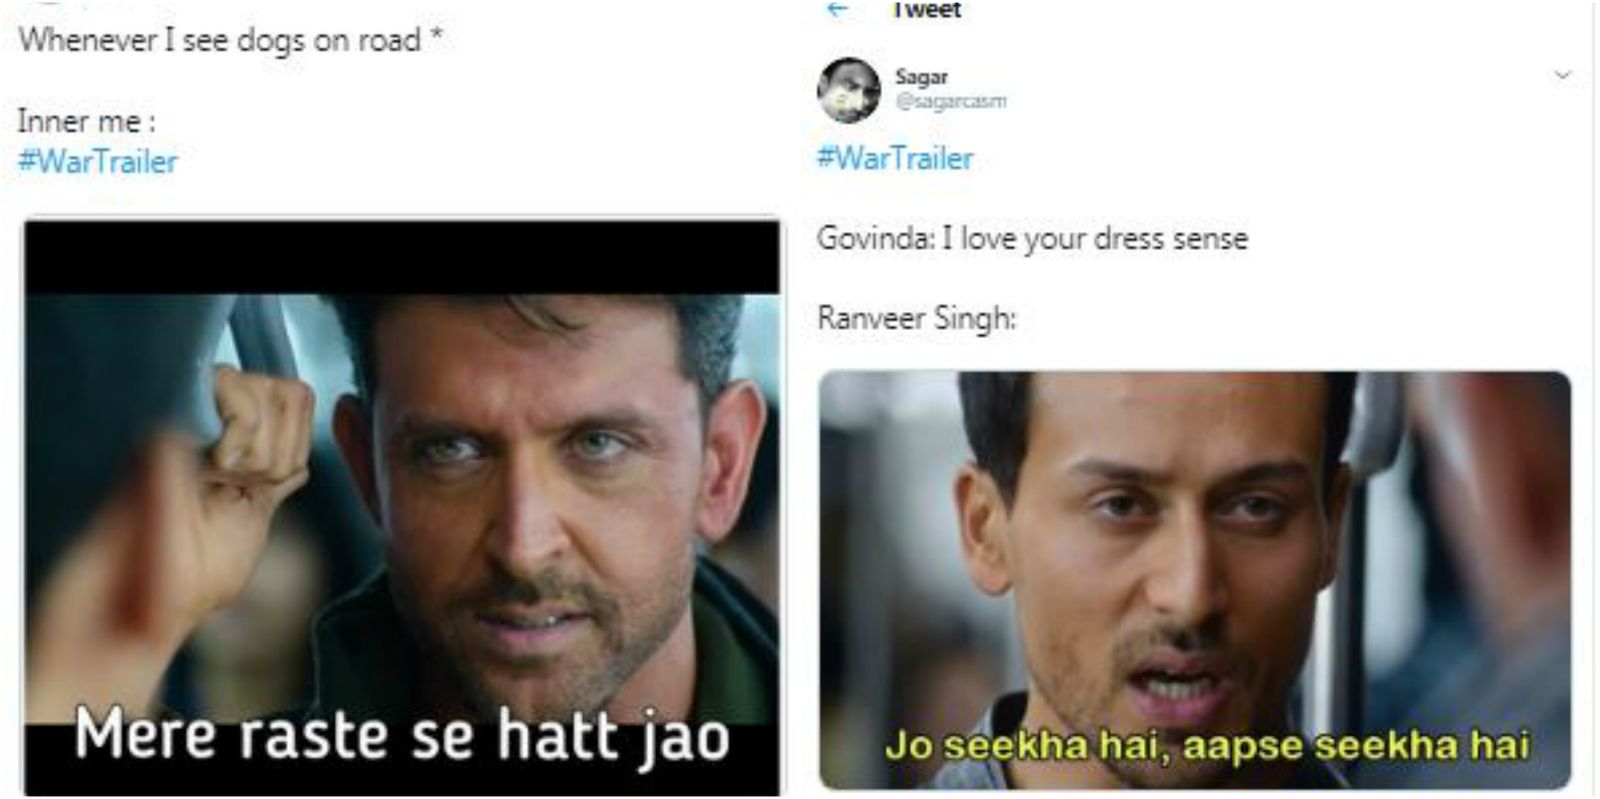 War Trailer: Hrithik Roshan And Tiger Shroff’s Antics Inspire Netizens To Come Up With These Hilarious Memes